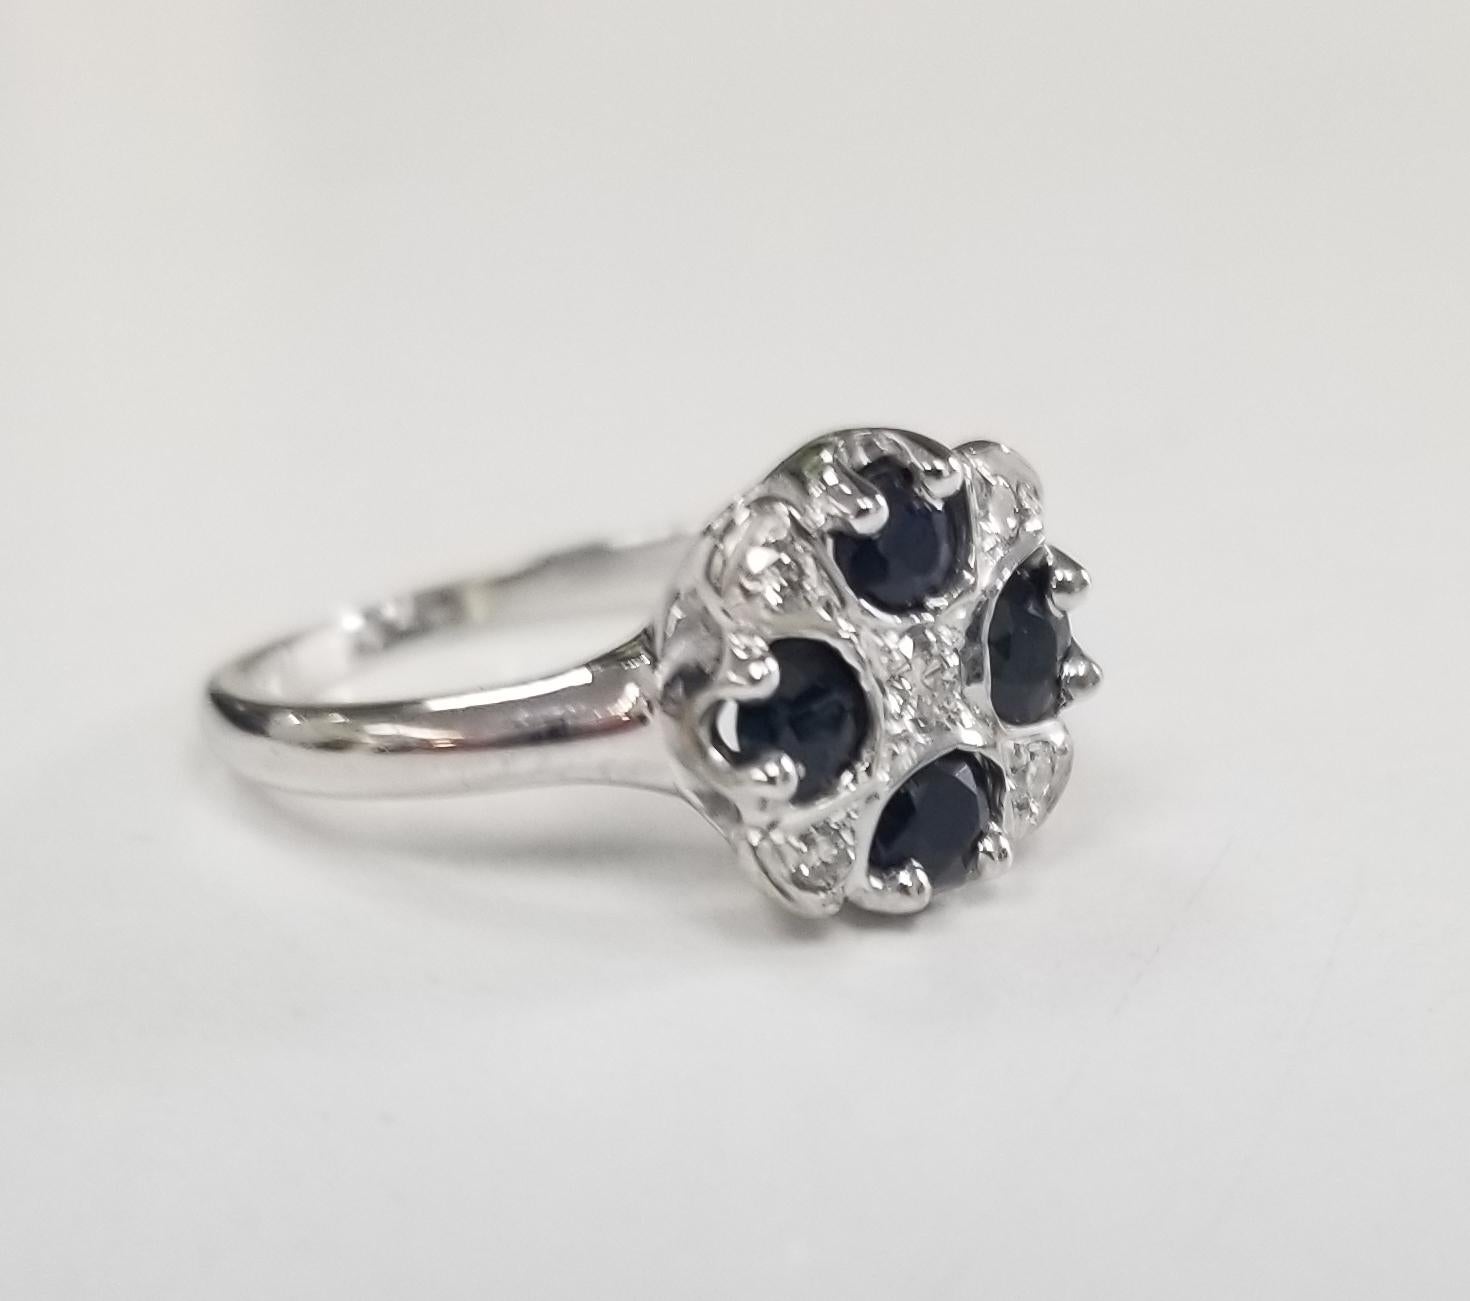 14k white gold sapphire and diamond ring, containing 4 round cut sapphires of fine quality weighing .70pts. and 5 round full cut diamonds of very fine quality weighing .13pts. in an 